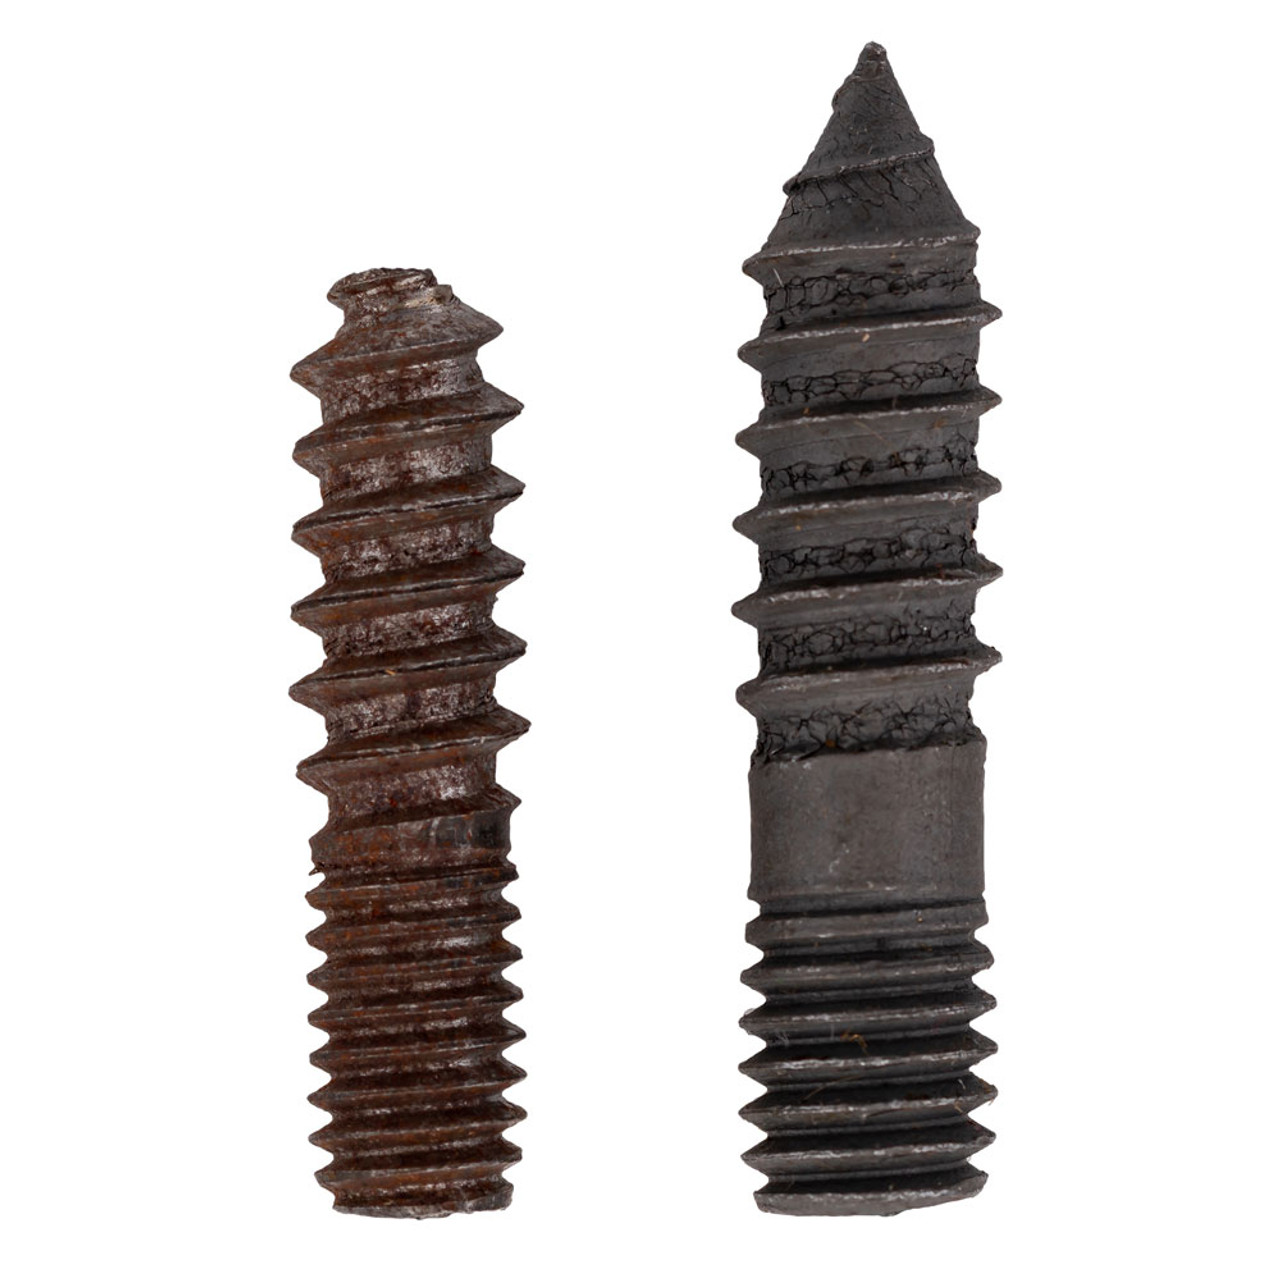 Hex Cap Screws VS Hex Tap Bolts: Aren't They the Same Thing?